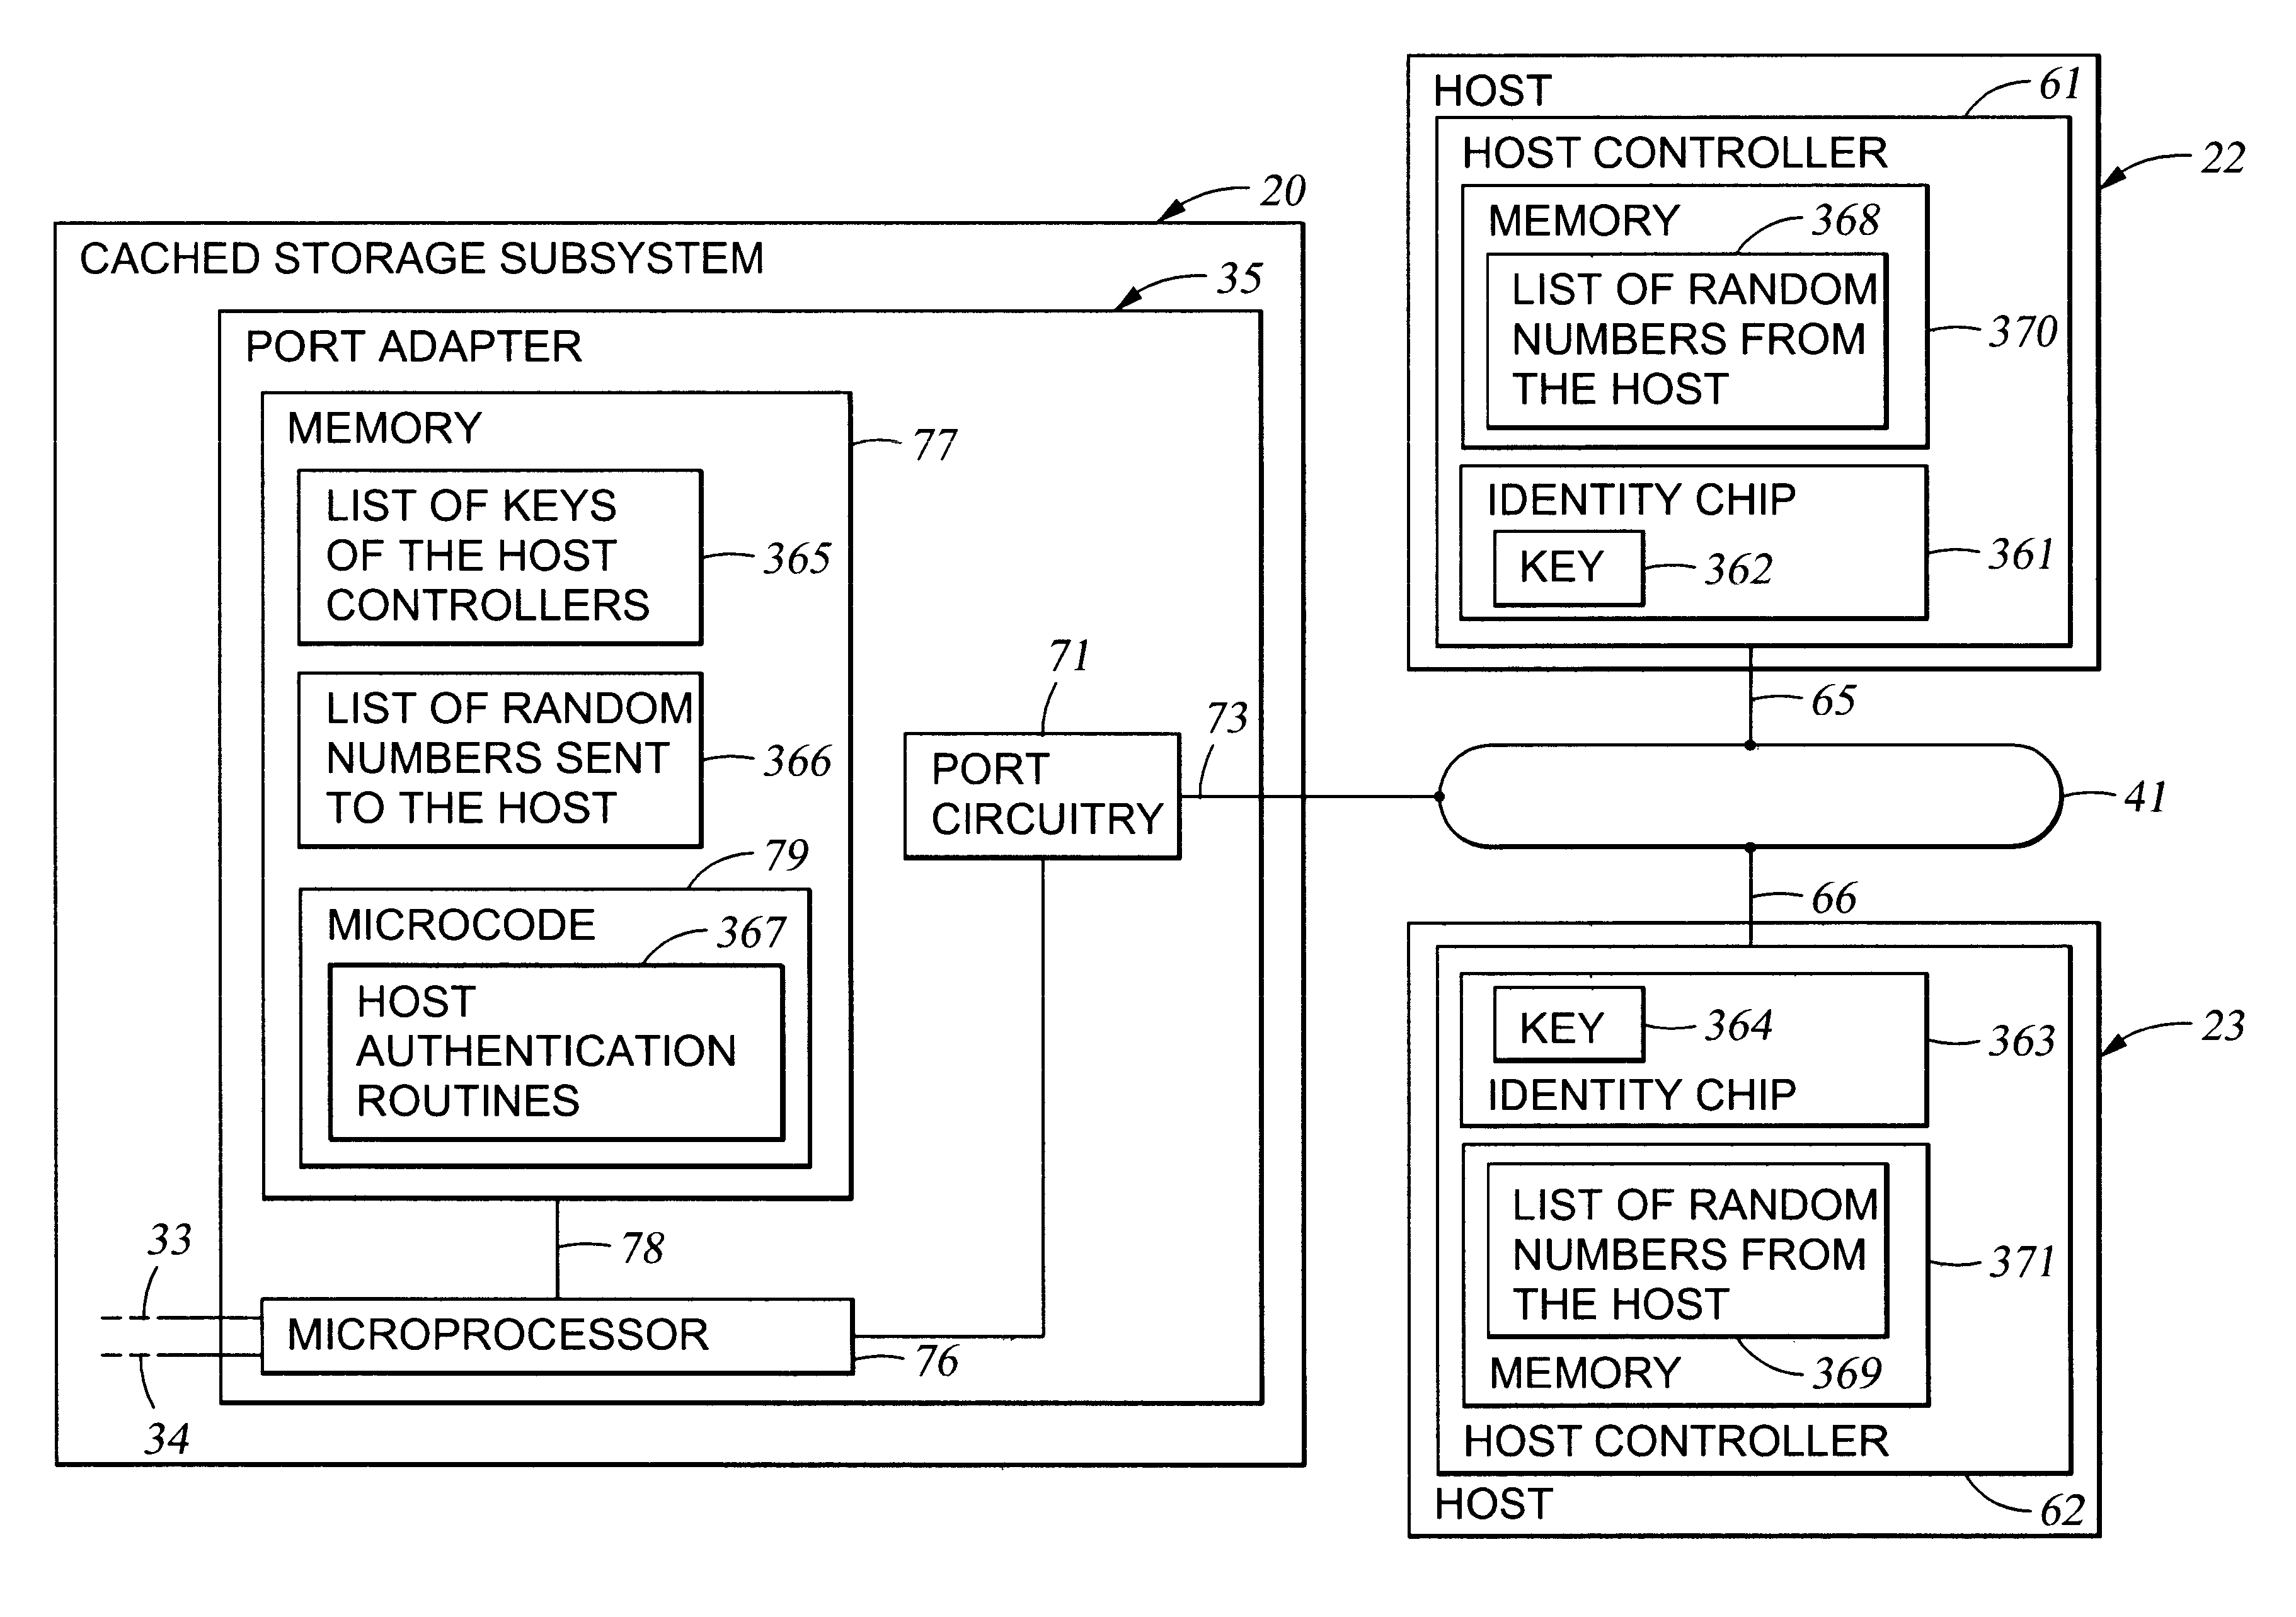 Authentication of a host processor requesting service in a data processing network